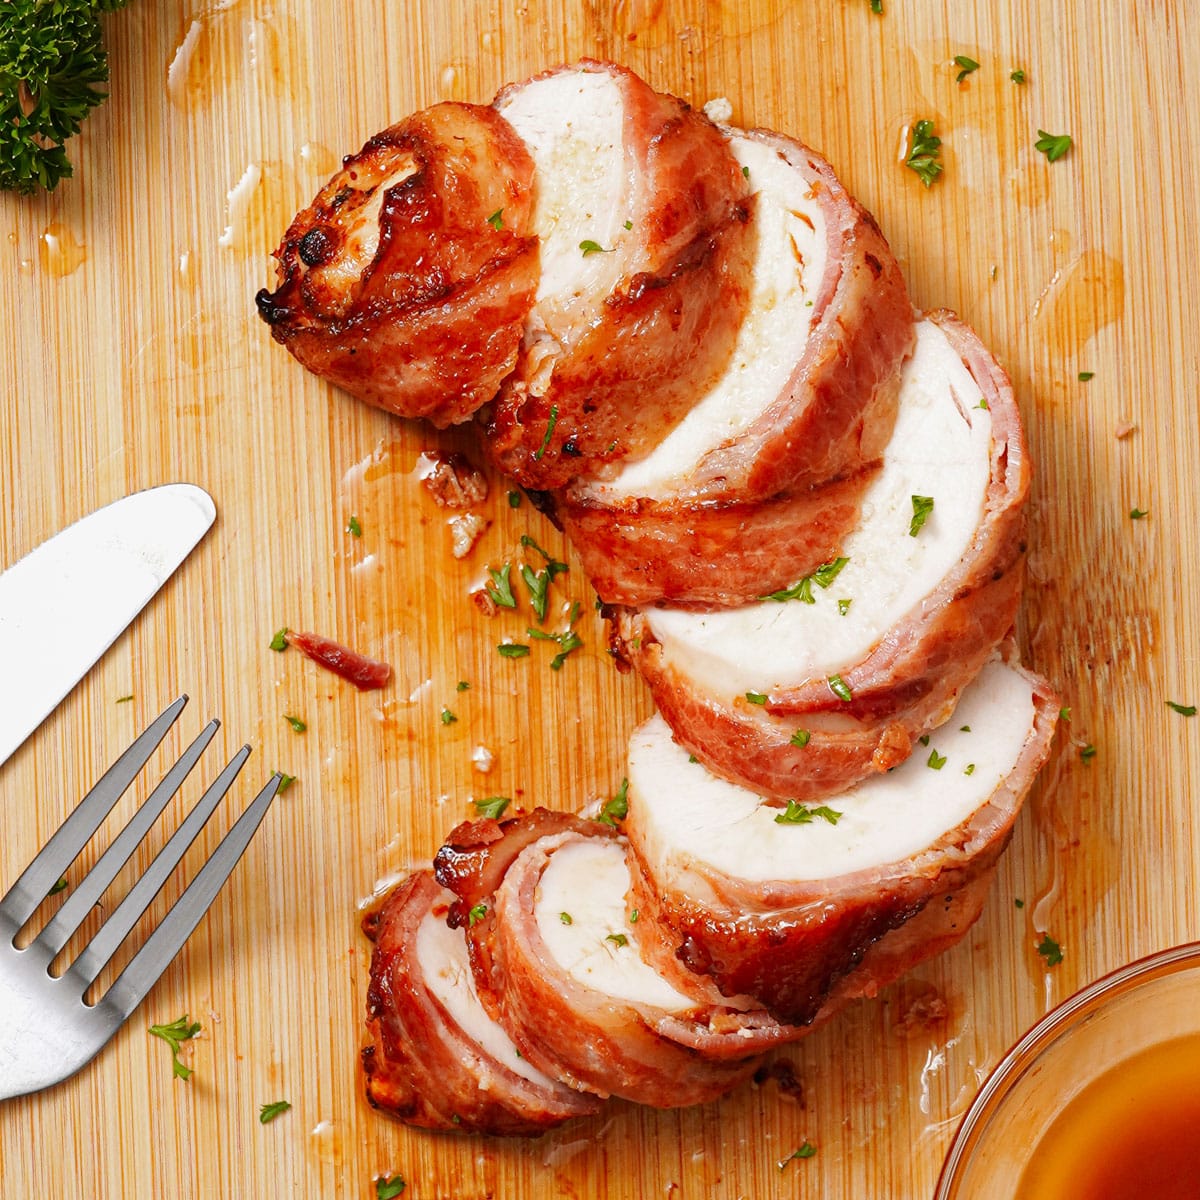 Sliced air fried bacon wrapped chicken breast on a bamboo chopping board.